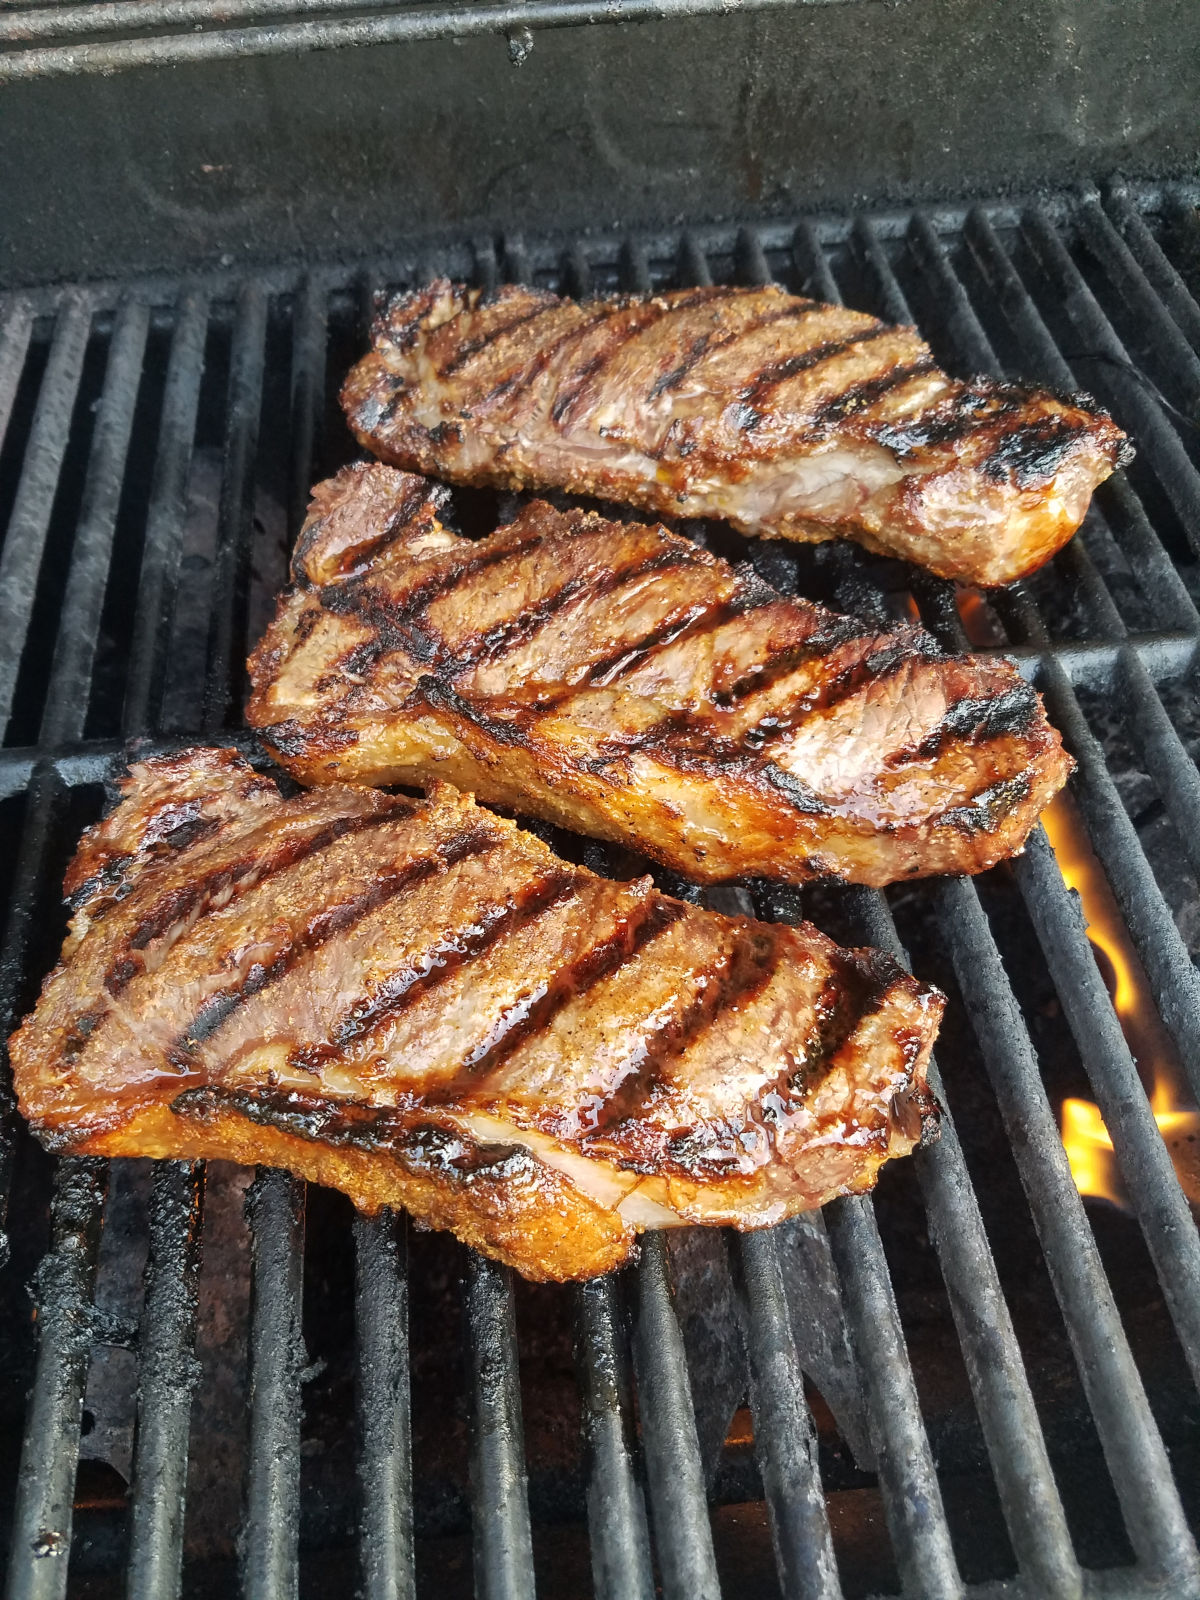 Whiskey marinated steak on a grill.